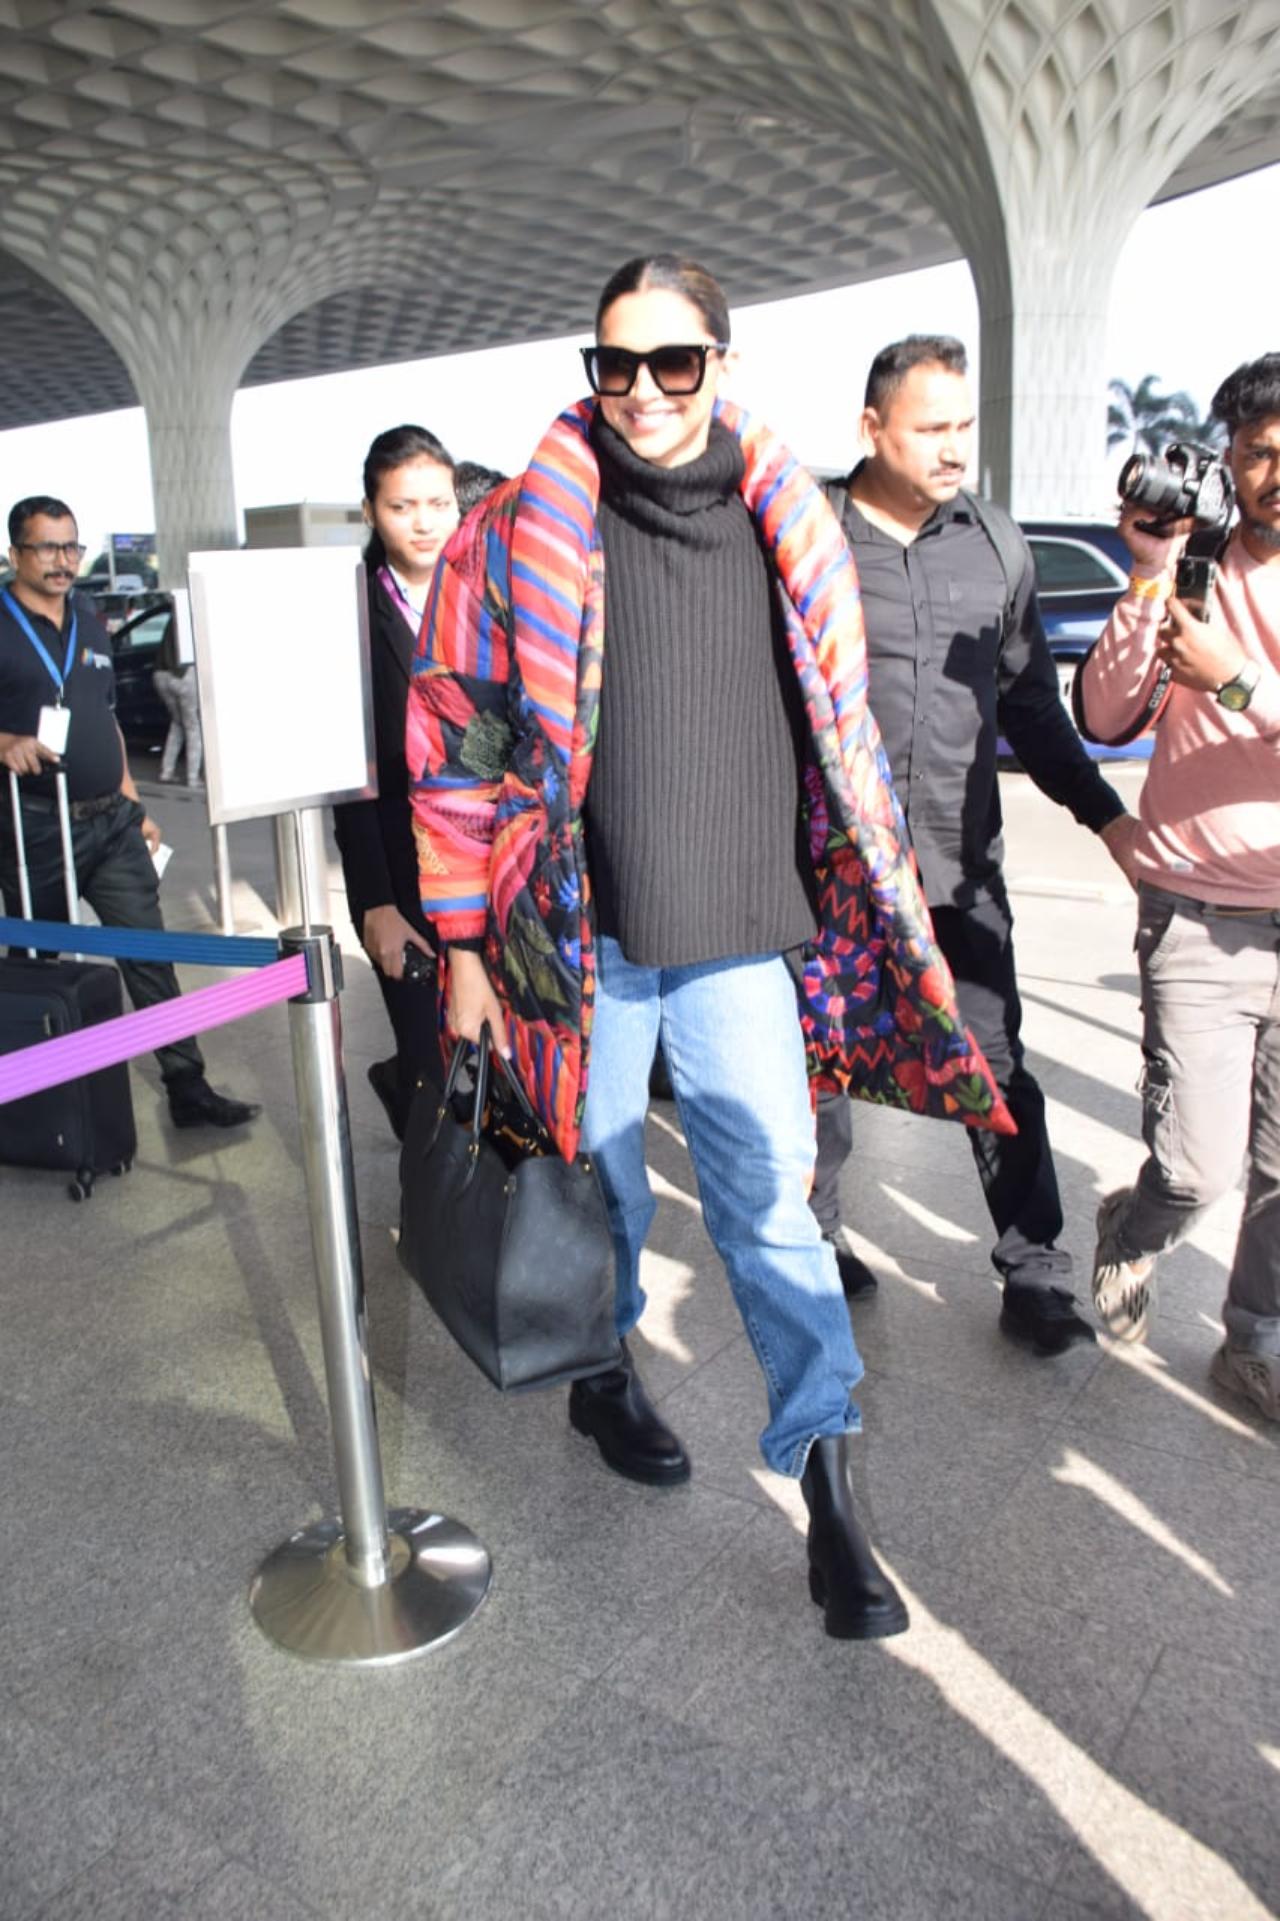 Around the same time as Hrithik, Deepika too was seen arriving at the airport. The actress who has been paired opposite Hrithik for the first time flashed her smile as she made her way to the airport